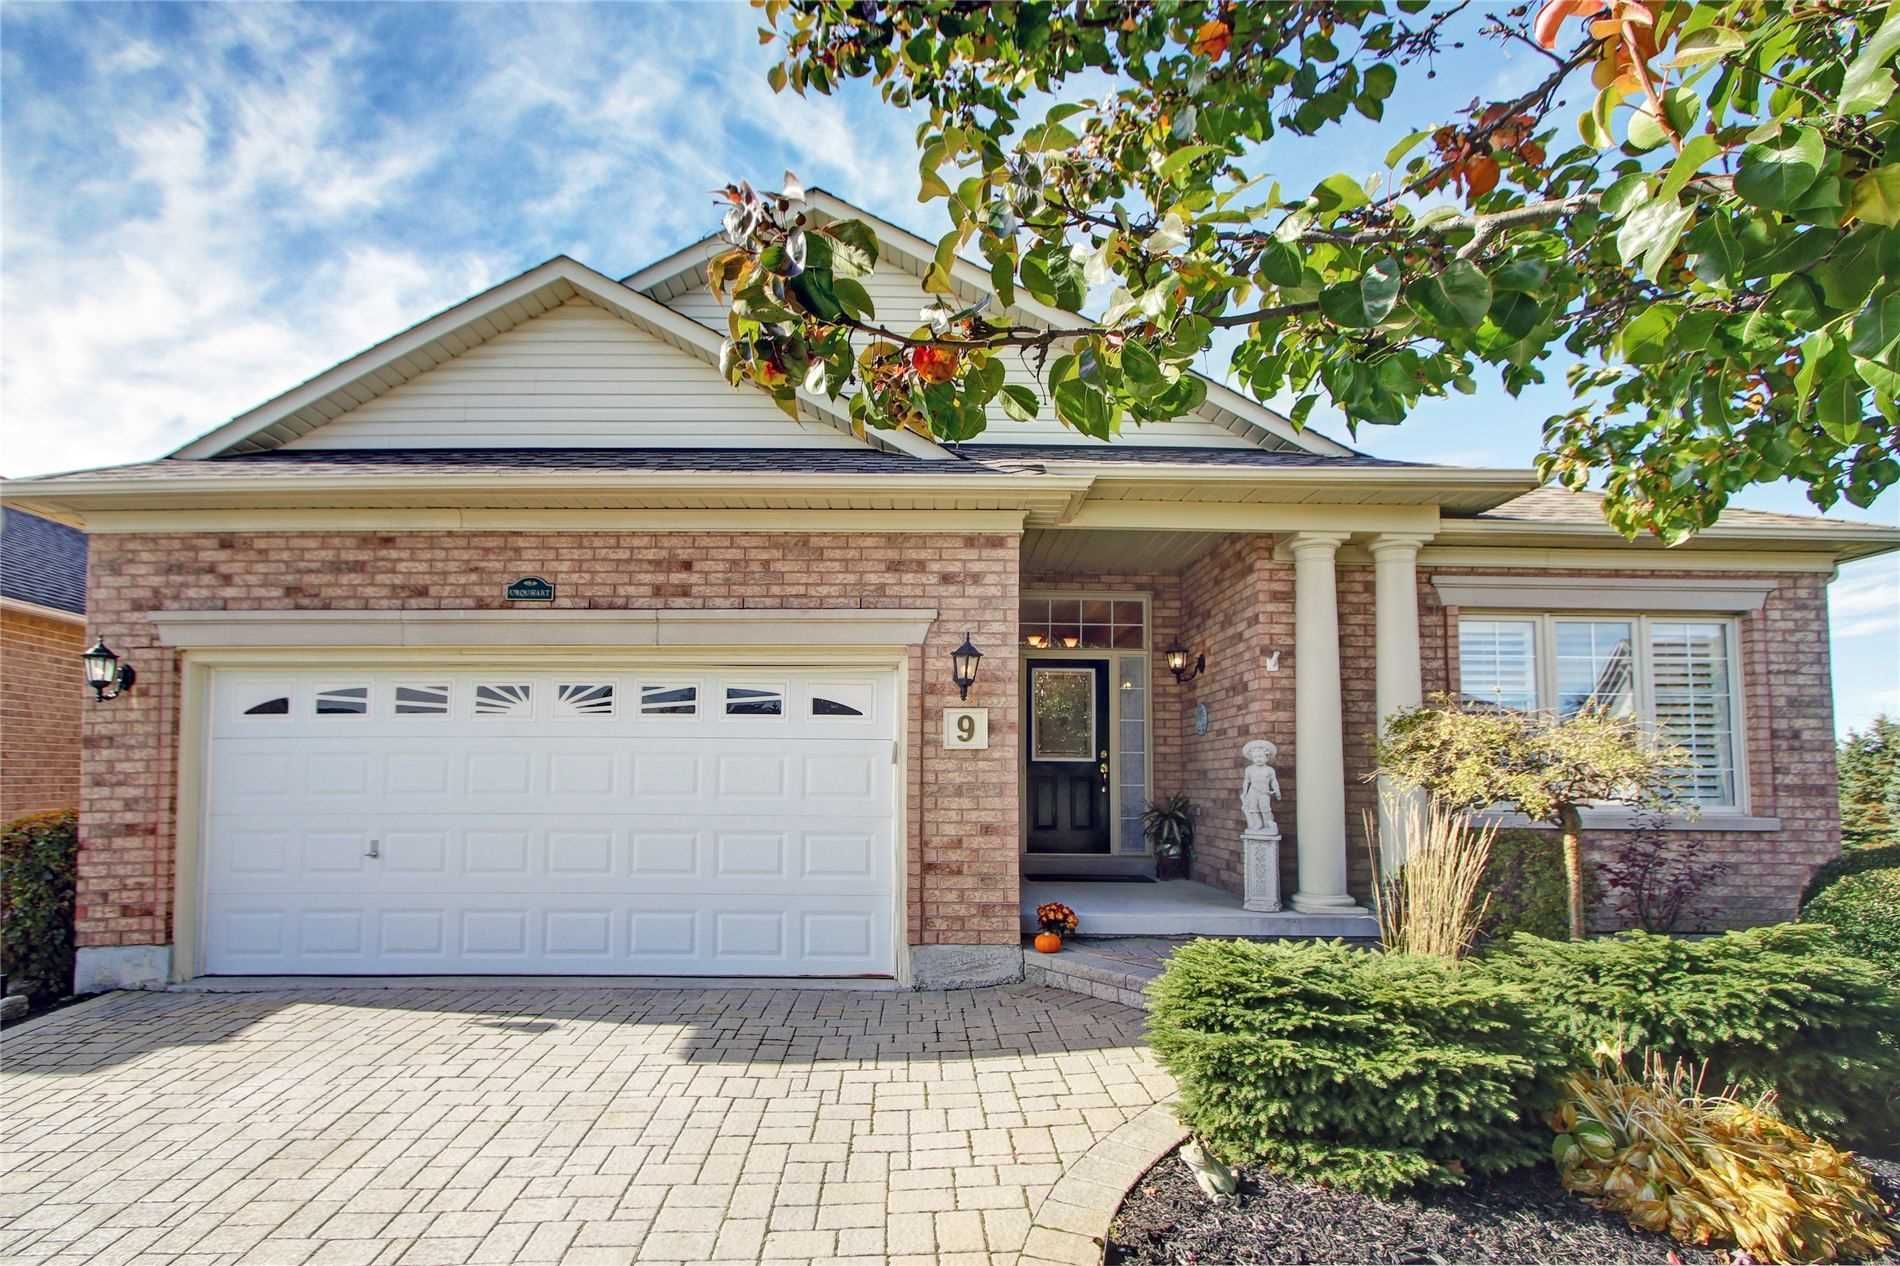 Main Photo: 9 Jacks Round in Stouffville: Freehold for sale : MLS®# N4619544